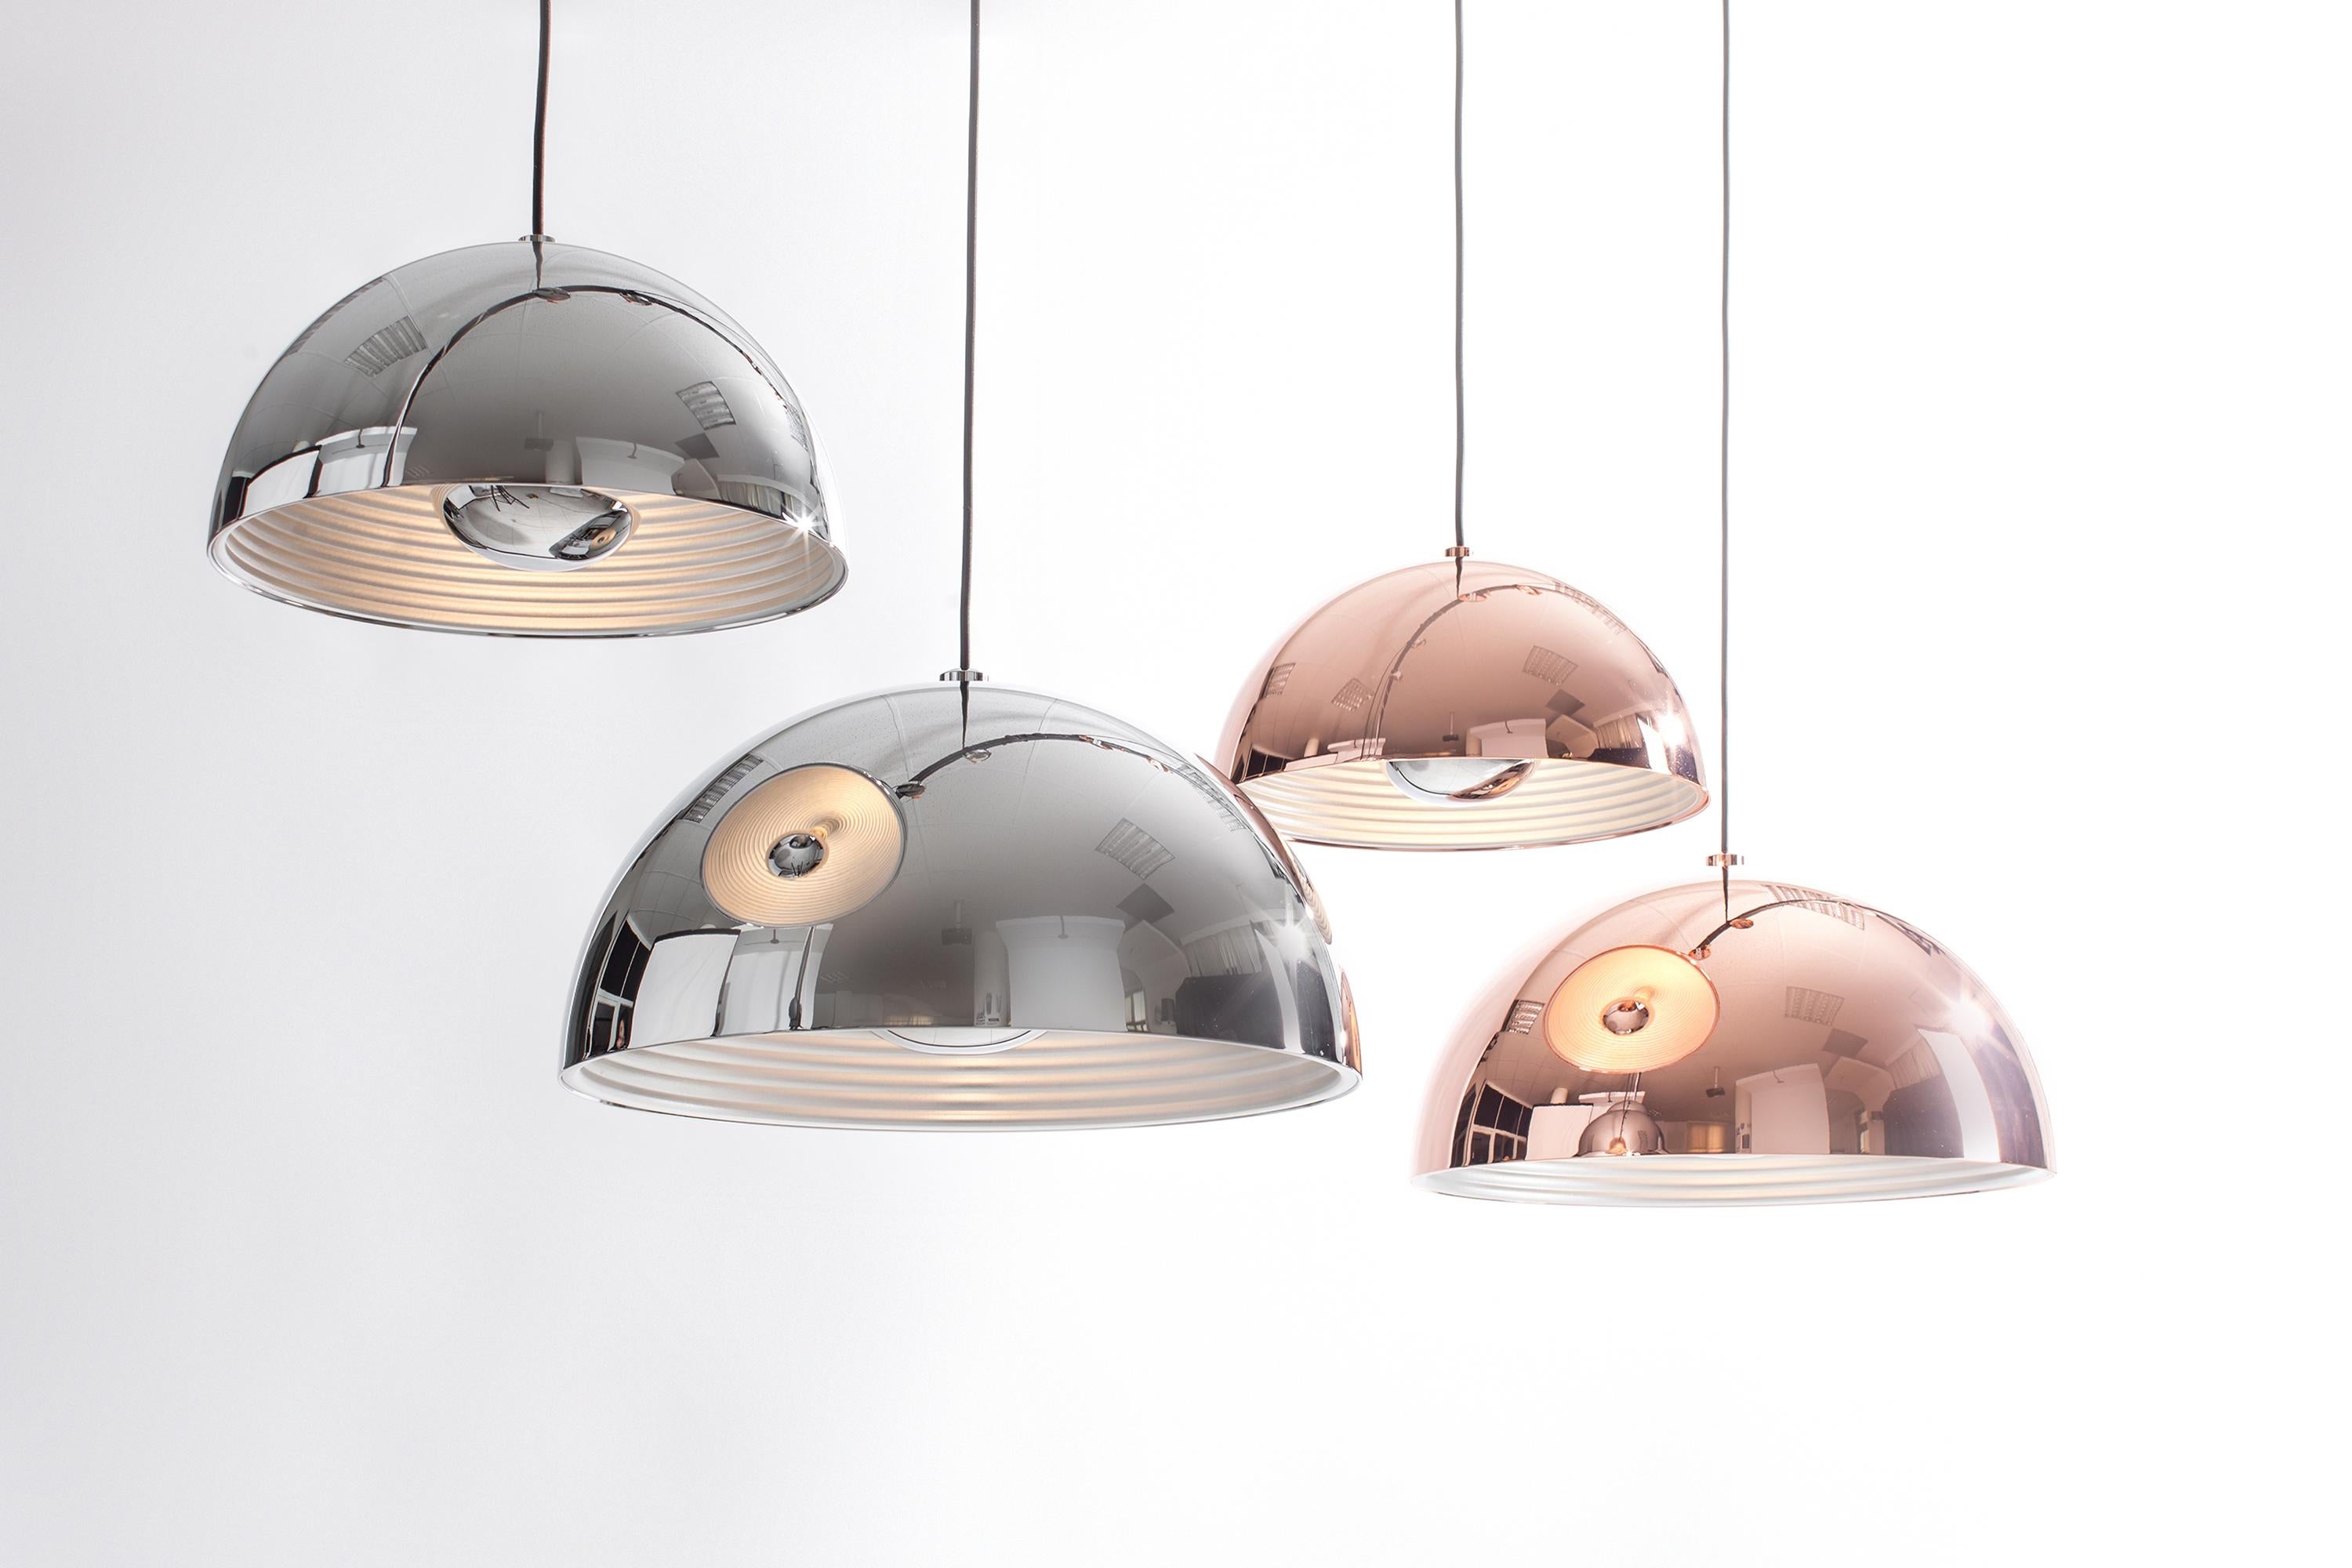 DOME Pendant fuses simplistic ideologies with precision craftsmanship. Balanced with a clean classic silhouette, the DOME Pendant features a dramatic oversized lampshade in a very no nonsense approach. This design is spectacularly coated with a